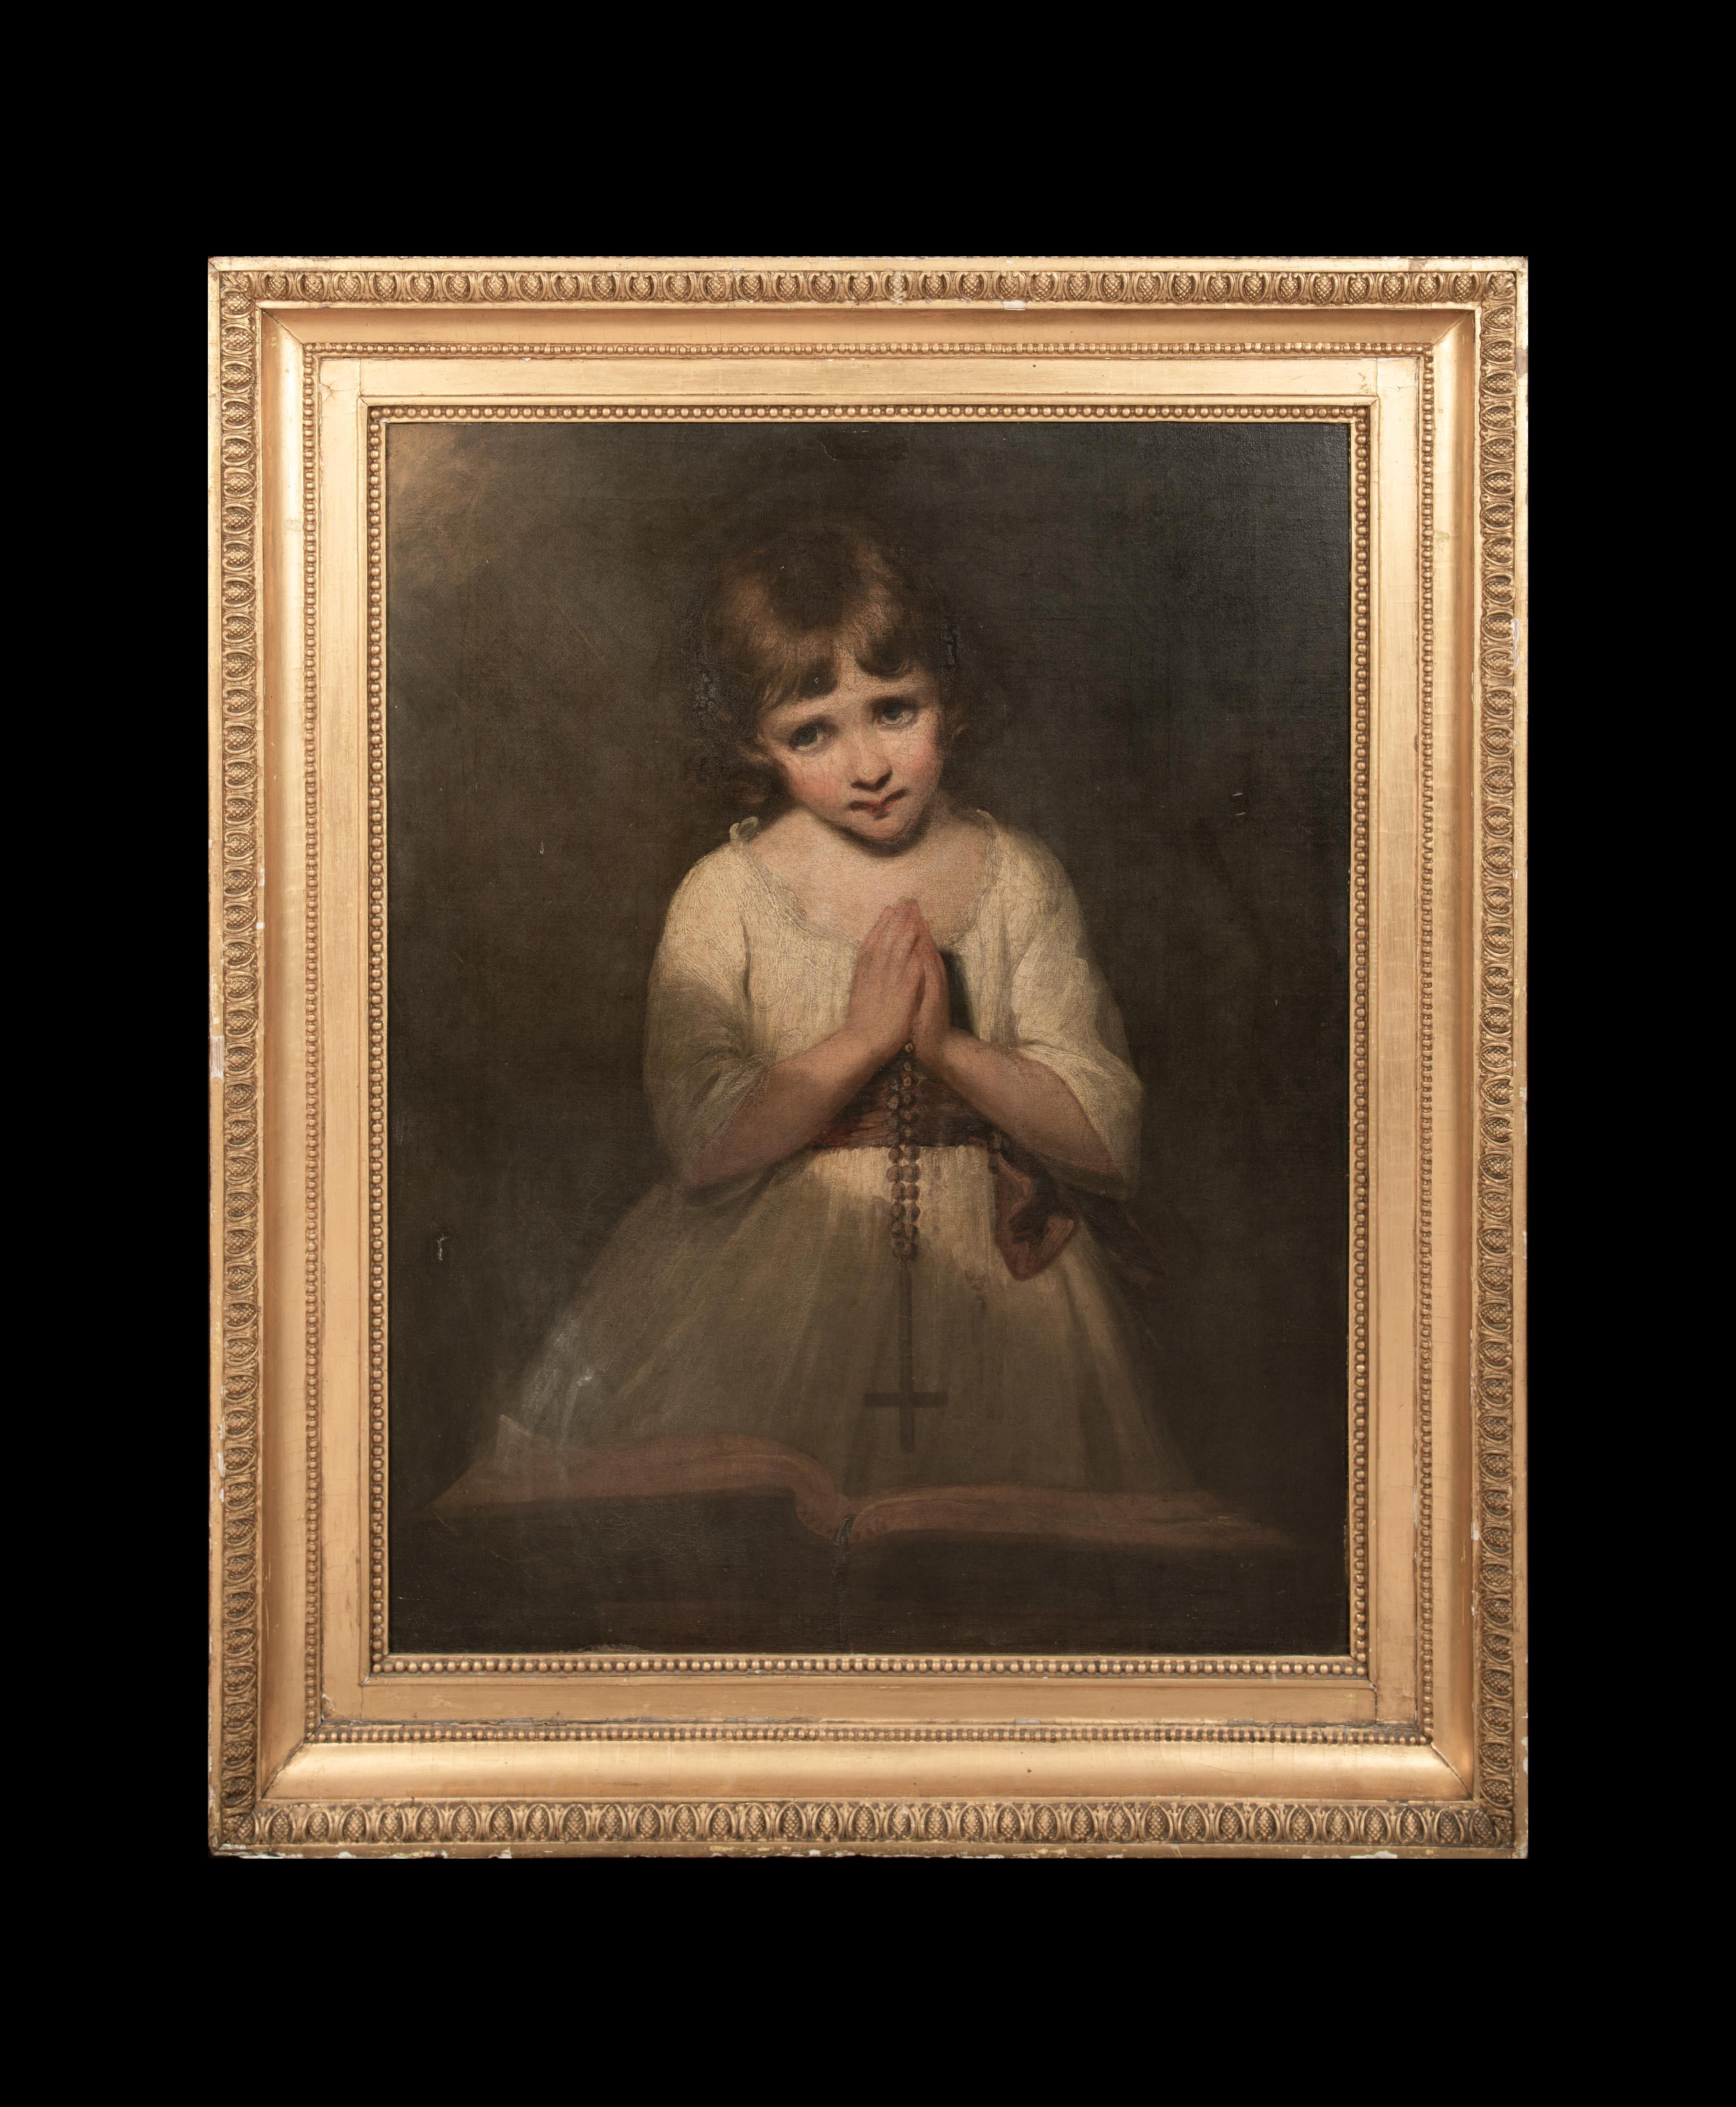 The Prayer, 19th Century

after JOSHUA REYNOLDS (1723-1792)

Large 18th Century English School portrait of a girl at prayer, oll on canvas attributed to Joshua Reynolds, Excellent quality and condition for its age typical of Reynolds child